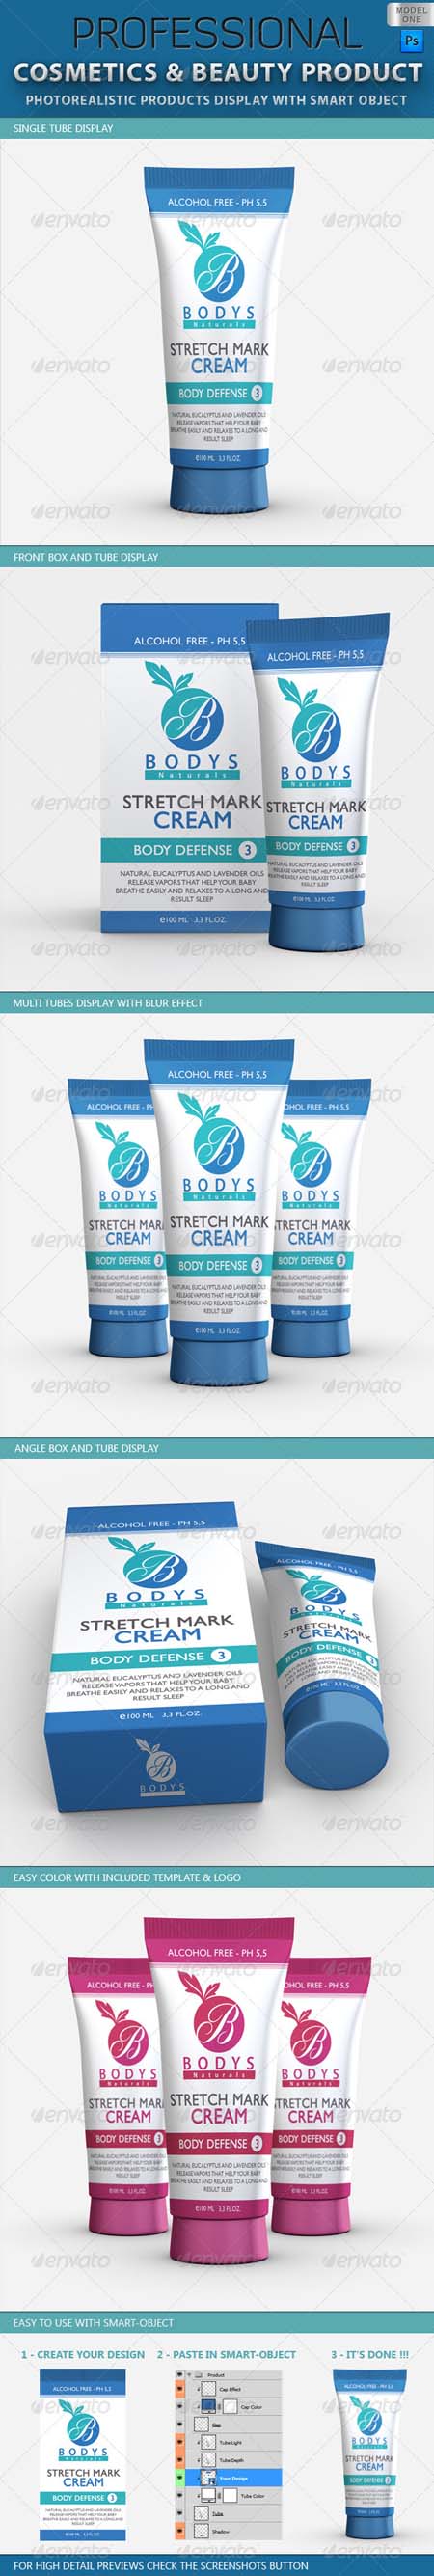 GraphicRiver Cosmetics and Beauty Products Mockup V1 Template